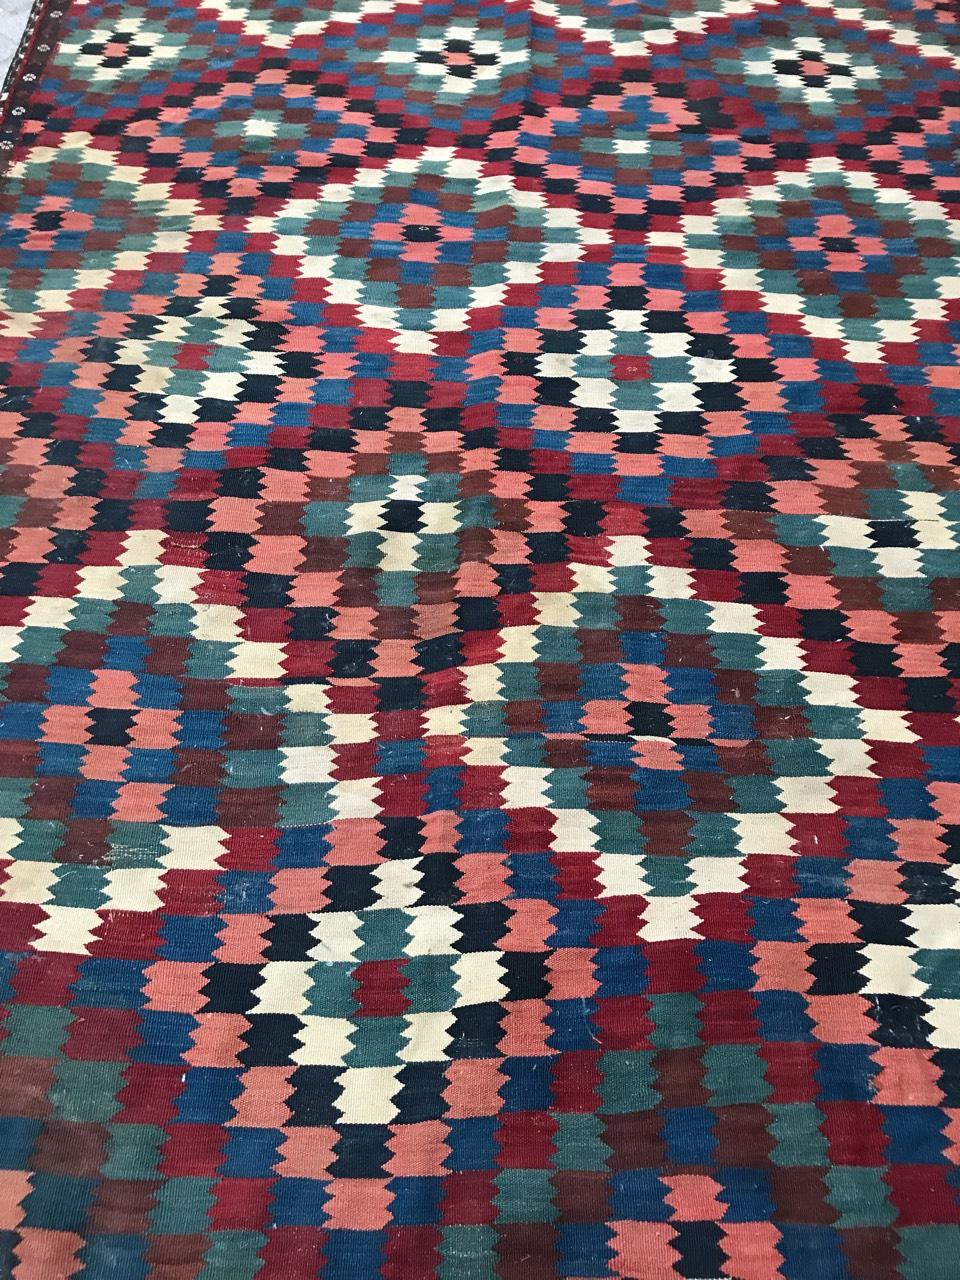 Very beautiful large Kilim, late 19th century with a wonderful geometrical design and nice natural colors, with blue, red, pink, brown and green. Entirely handwoven with wool on wool foundation.